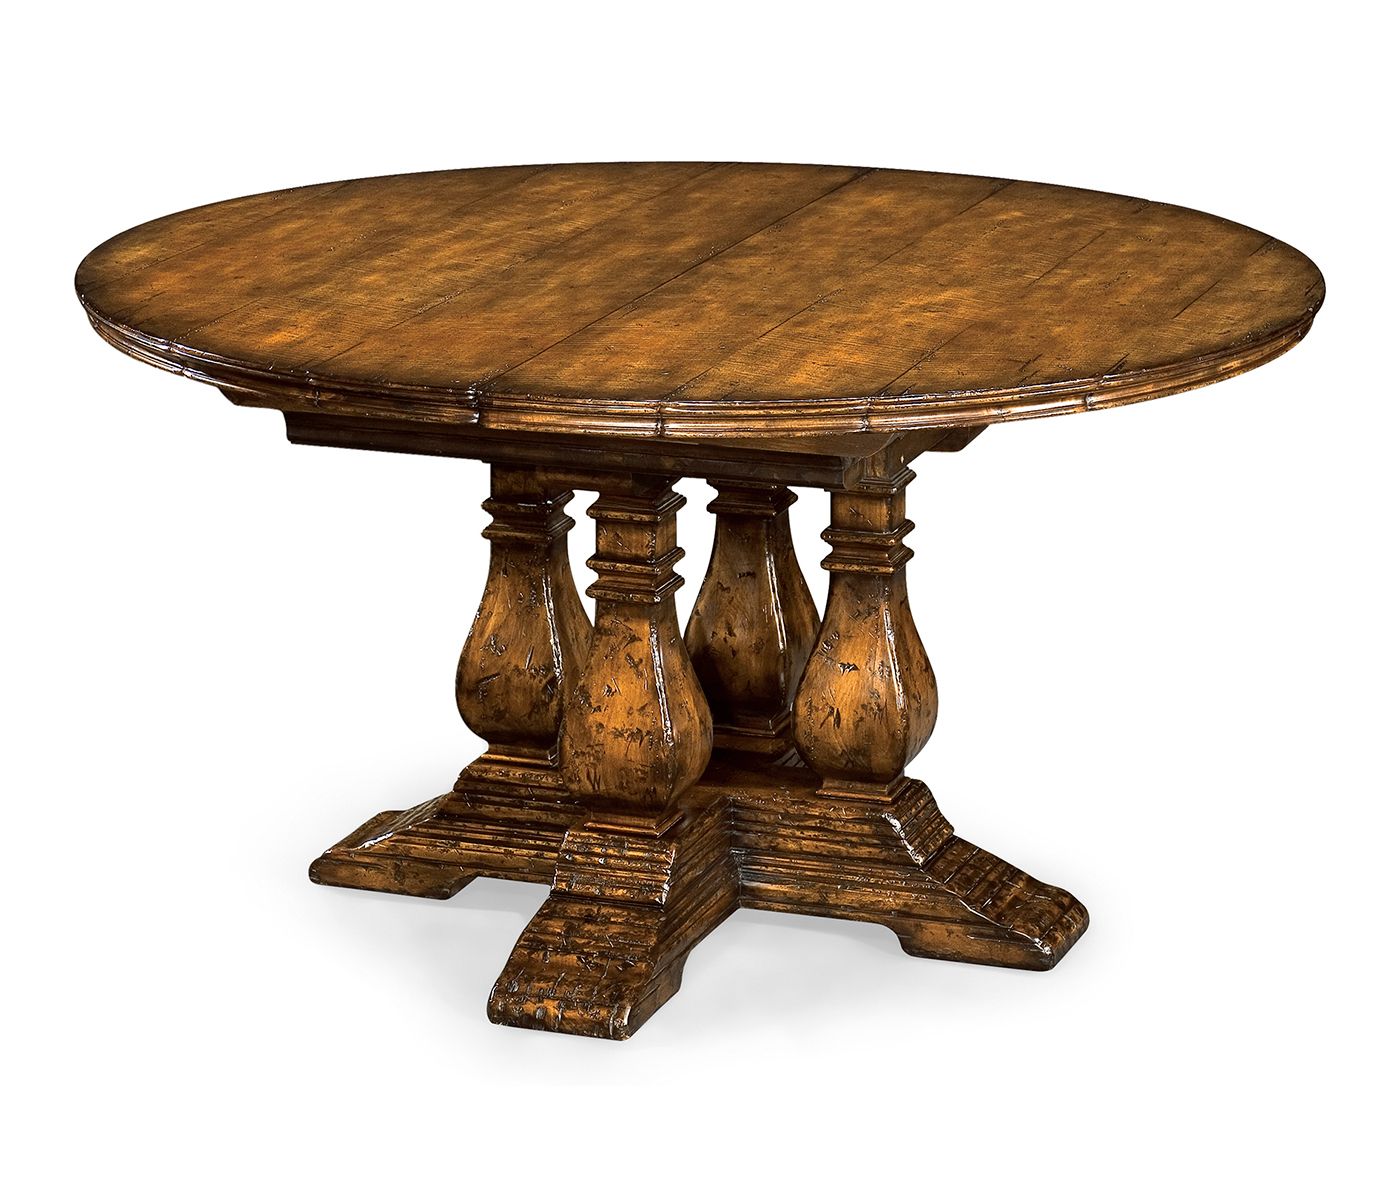 54" Country Walnut Round Extending Dining Table Pertaining To Newest Walnut Tove Dining Tables (View 13 of 20)